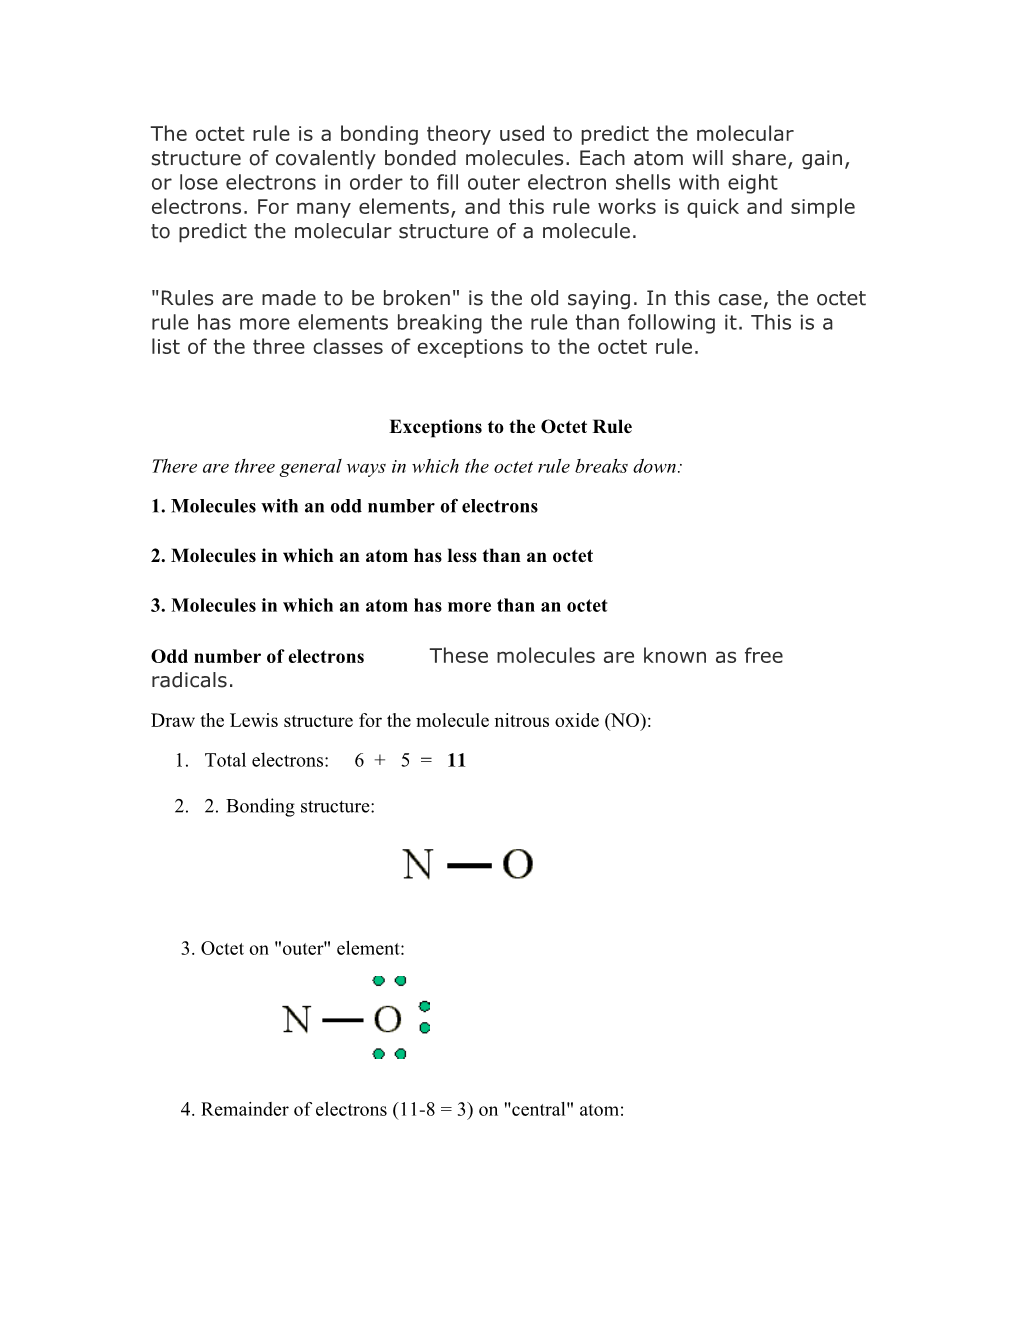 1. Molecules with an Odd Number of Electrons